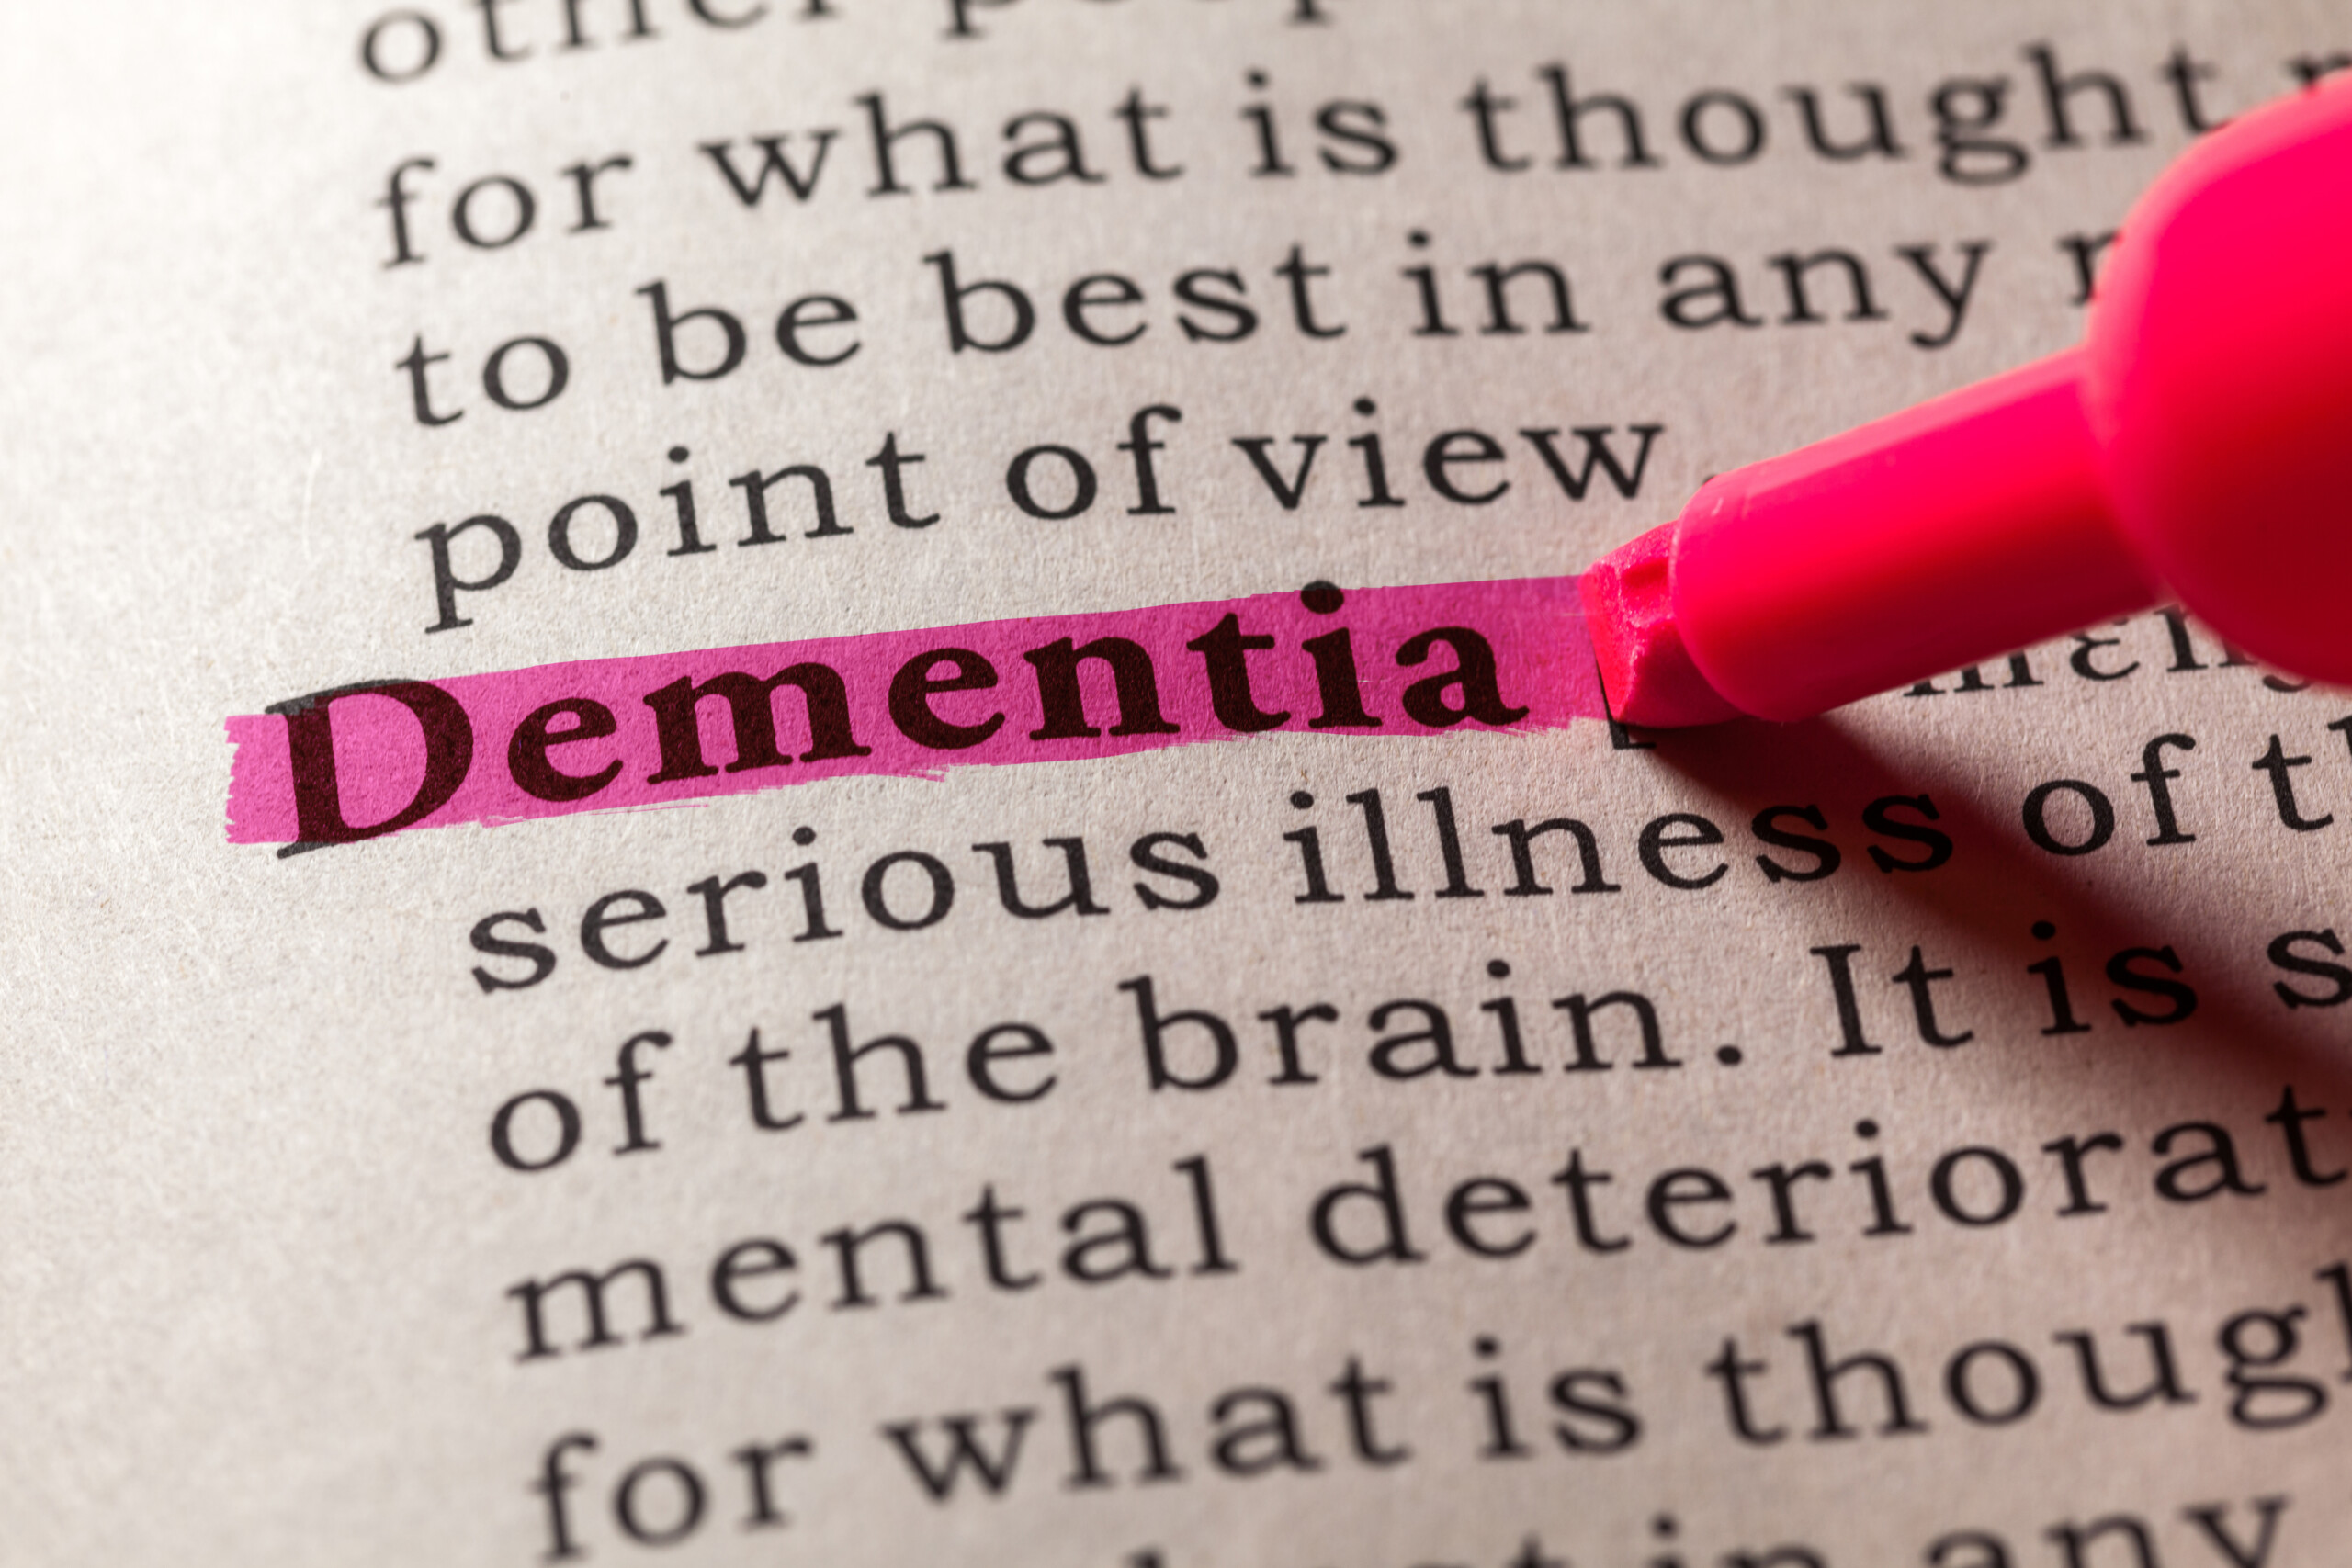 What Do Your Feet Have to Do with Dementia?